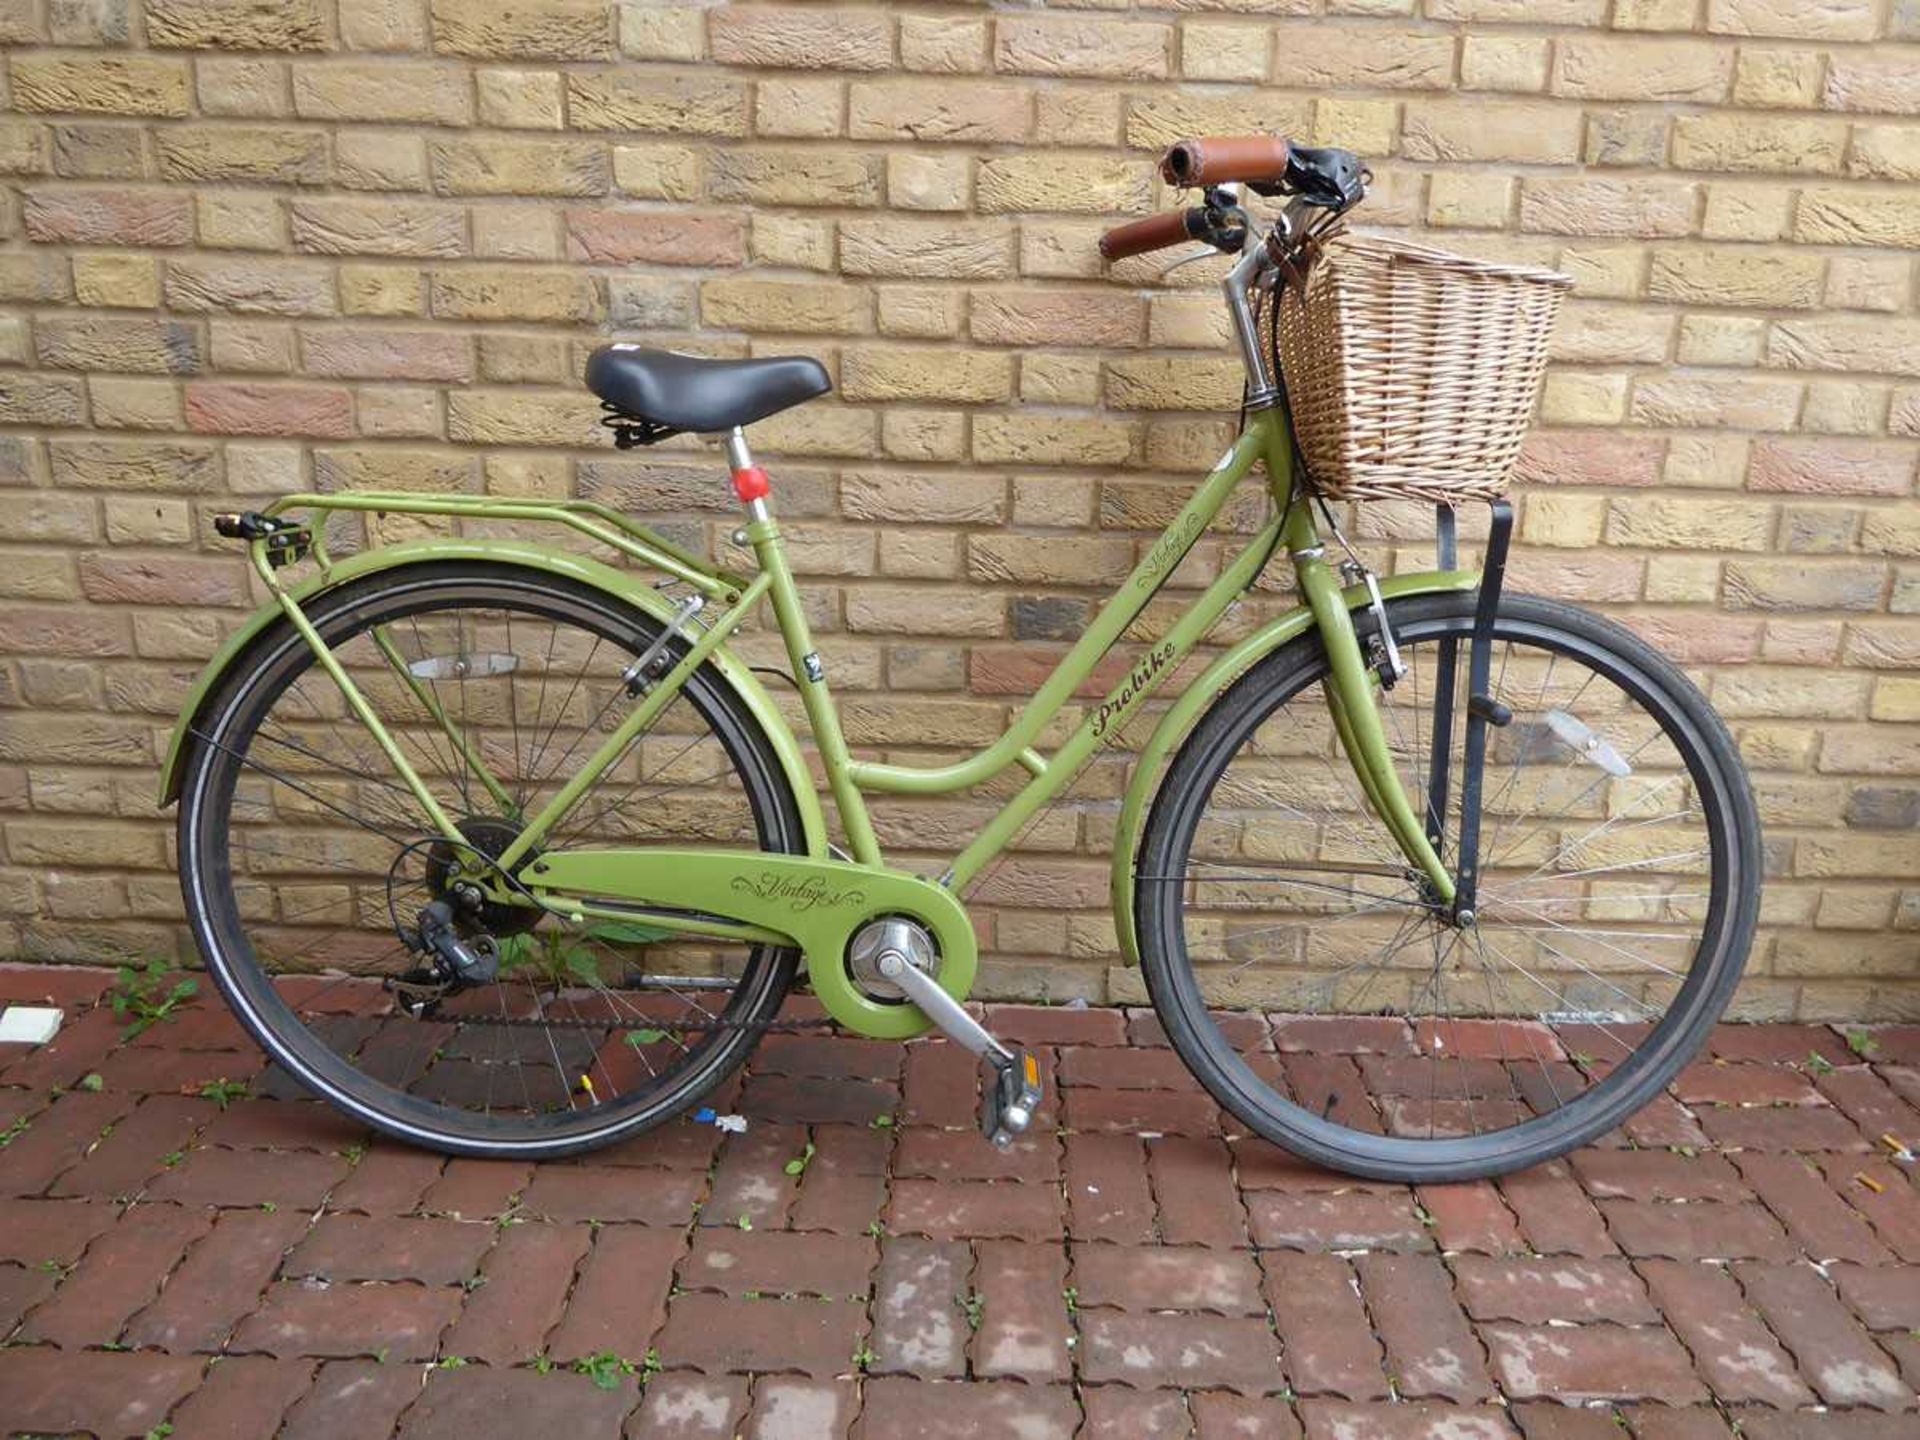 Ladies vintage ProBike in green with basket on front